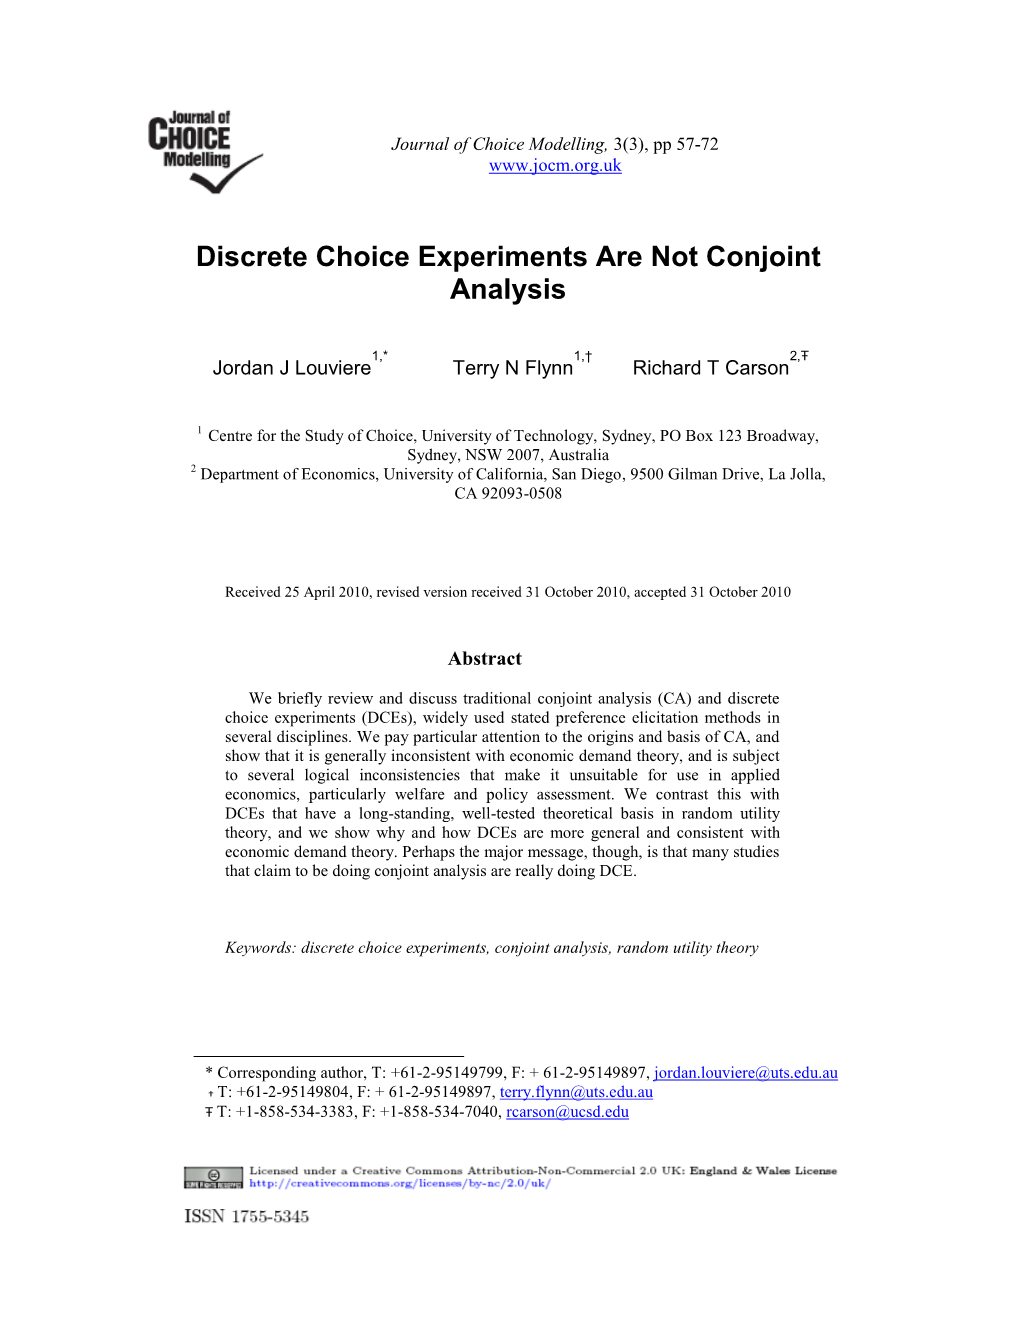 Discrete Choice Experiments Are Not Conjoint Analysis